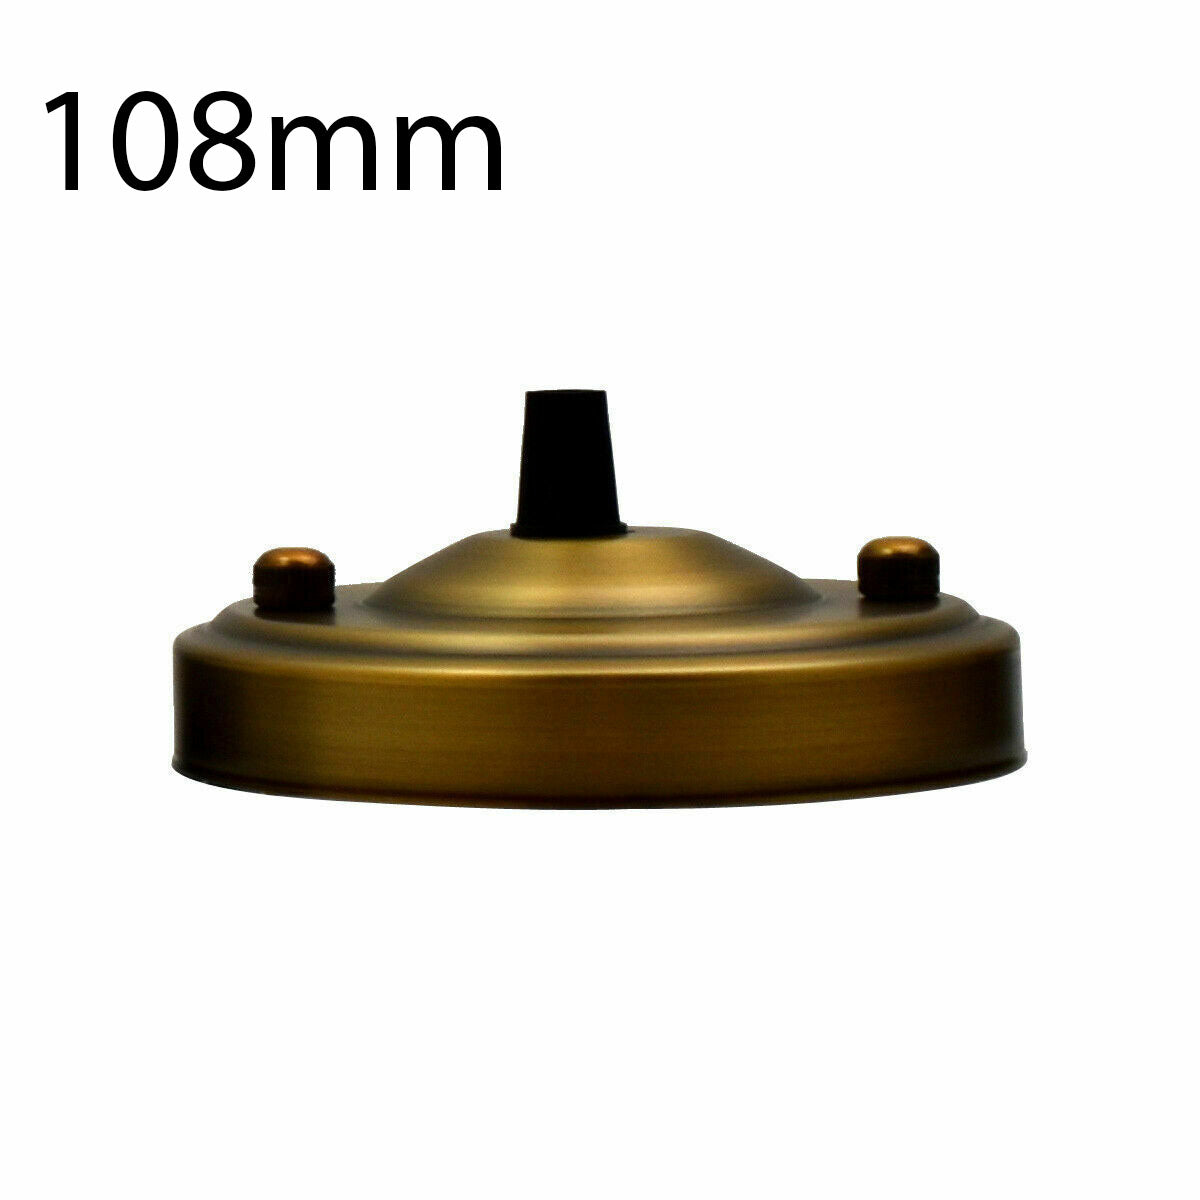 108mm Single Outlet Drop Metal Front Fitting Ceiling Rose